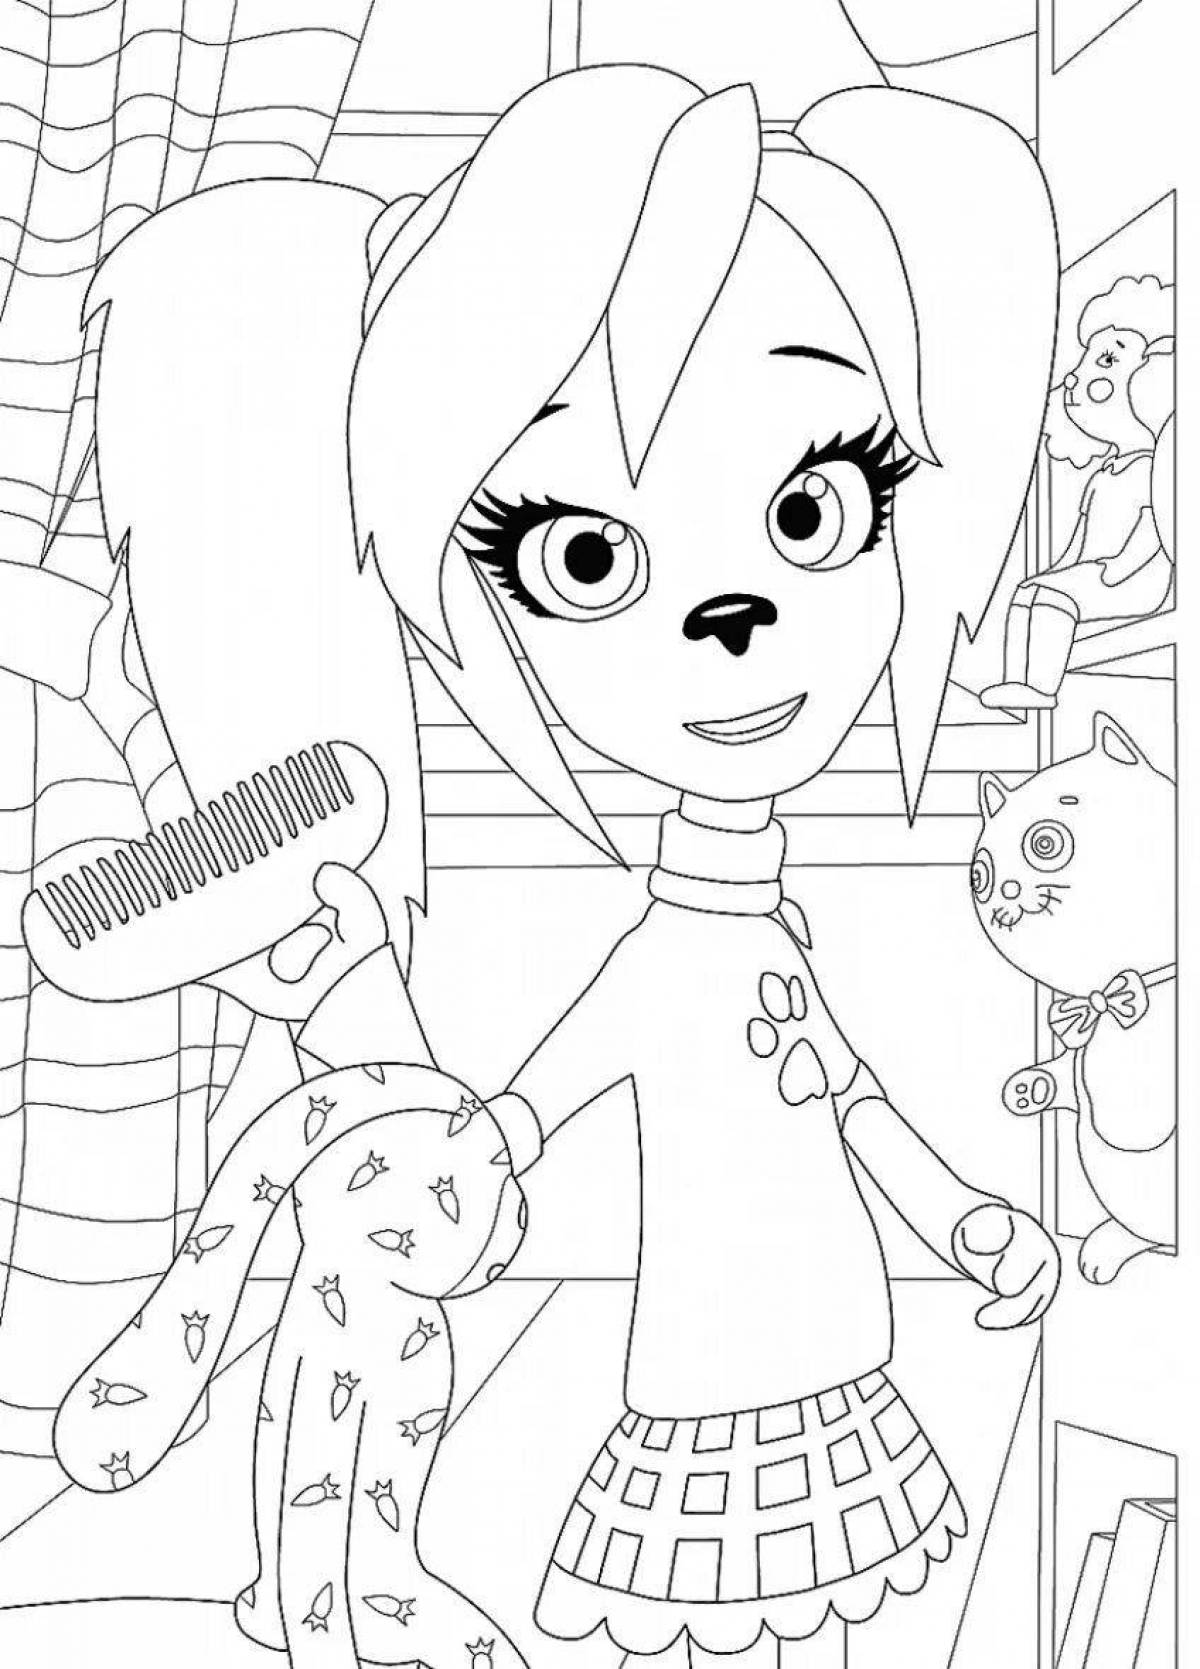 Adorable barboskin coloring pages for kids 5-6 years old